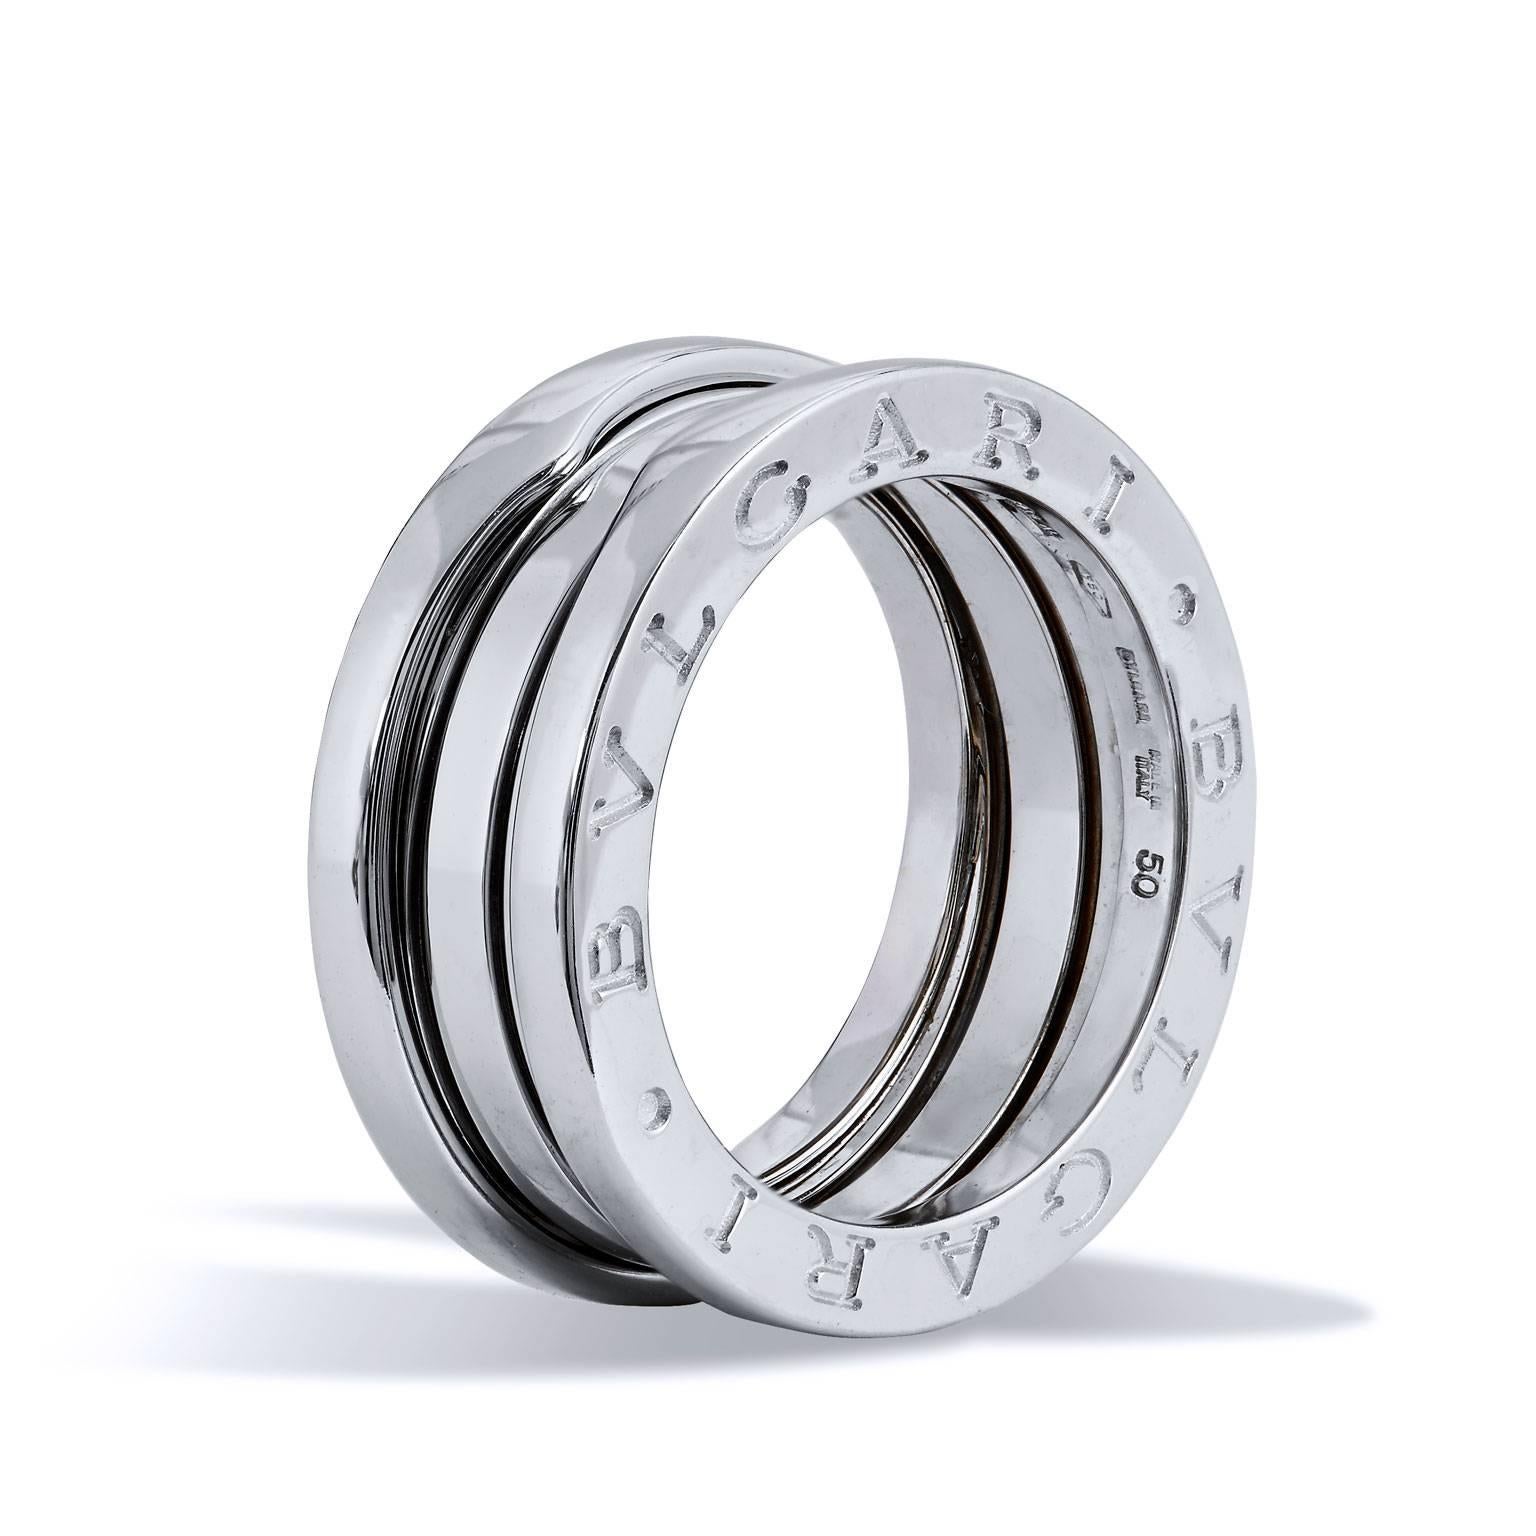 Enjoy this previously loved Bvlgari B. Zero 1 ring in 18 karat white gold (size 5). Shaped with sharp curves and engraved with the iconic Bvlgari logo the B. Zero 1 Design legend ring unveils its daring spirit through the geometric fluidity of its